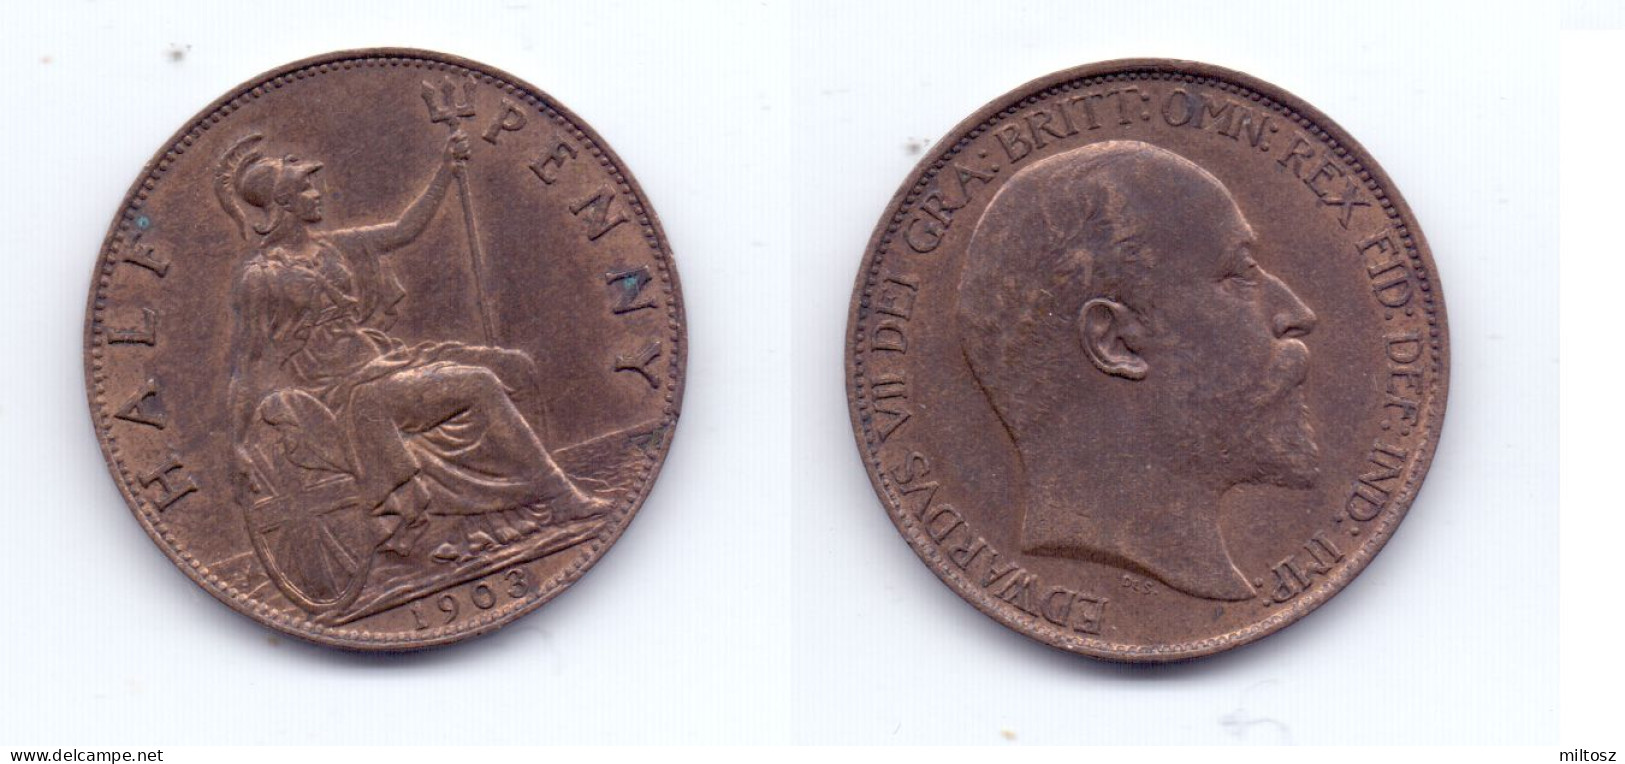 Great Britain 1/2 Penny 1903 - C. 1/2 Penny